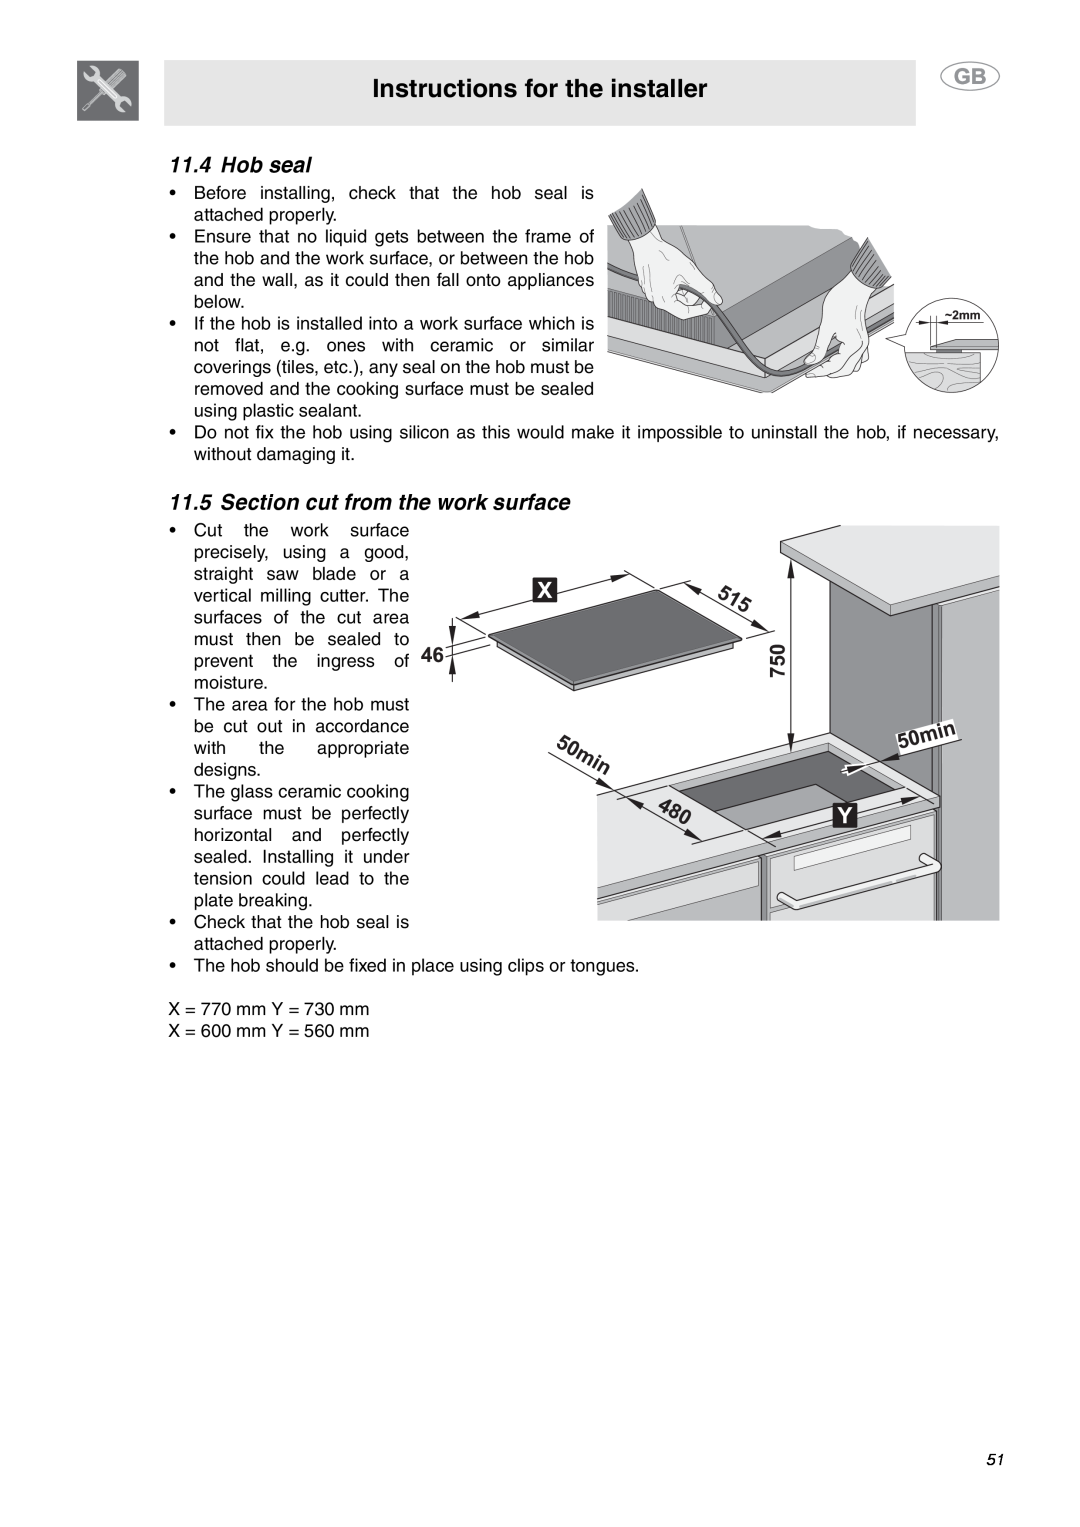 Smeg SE2642ID3 manual Hob seal, Section cut from the work surface, Instructions for the installer 